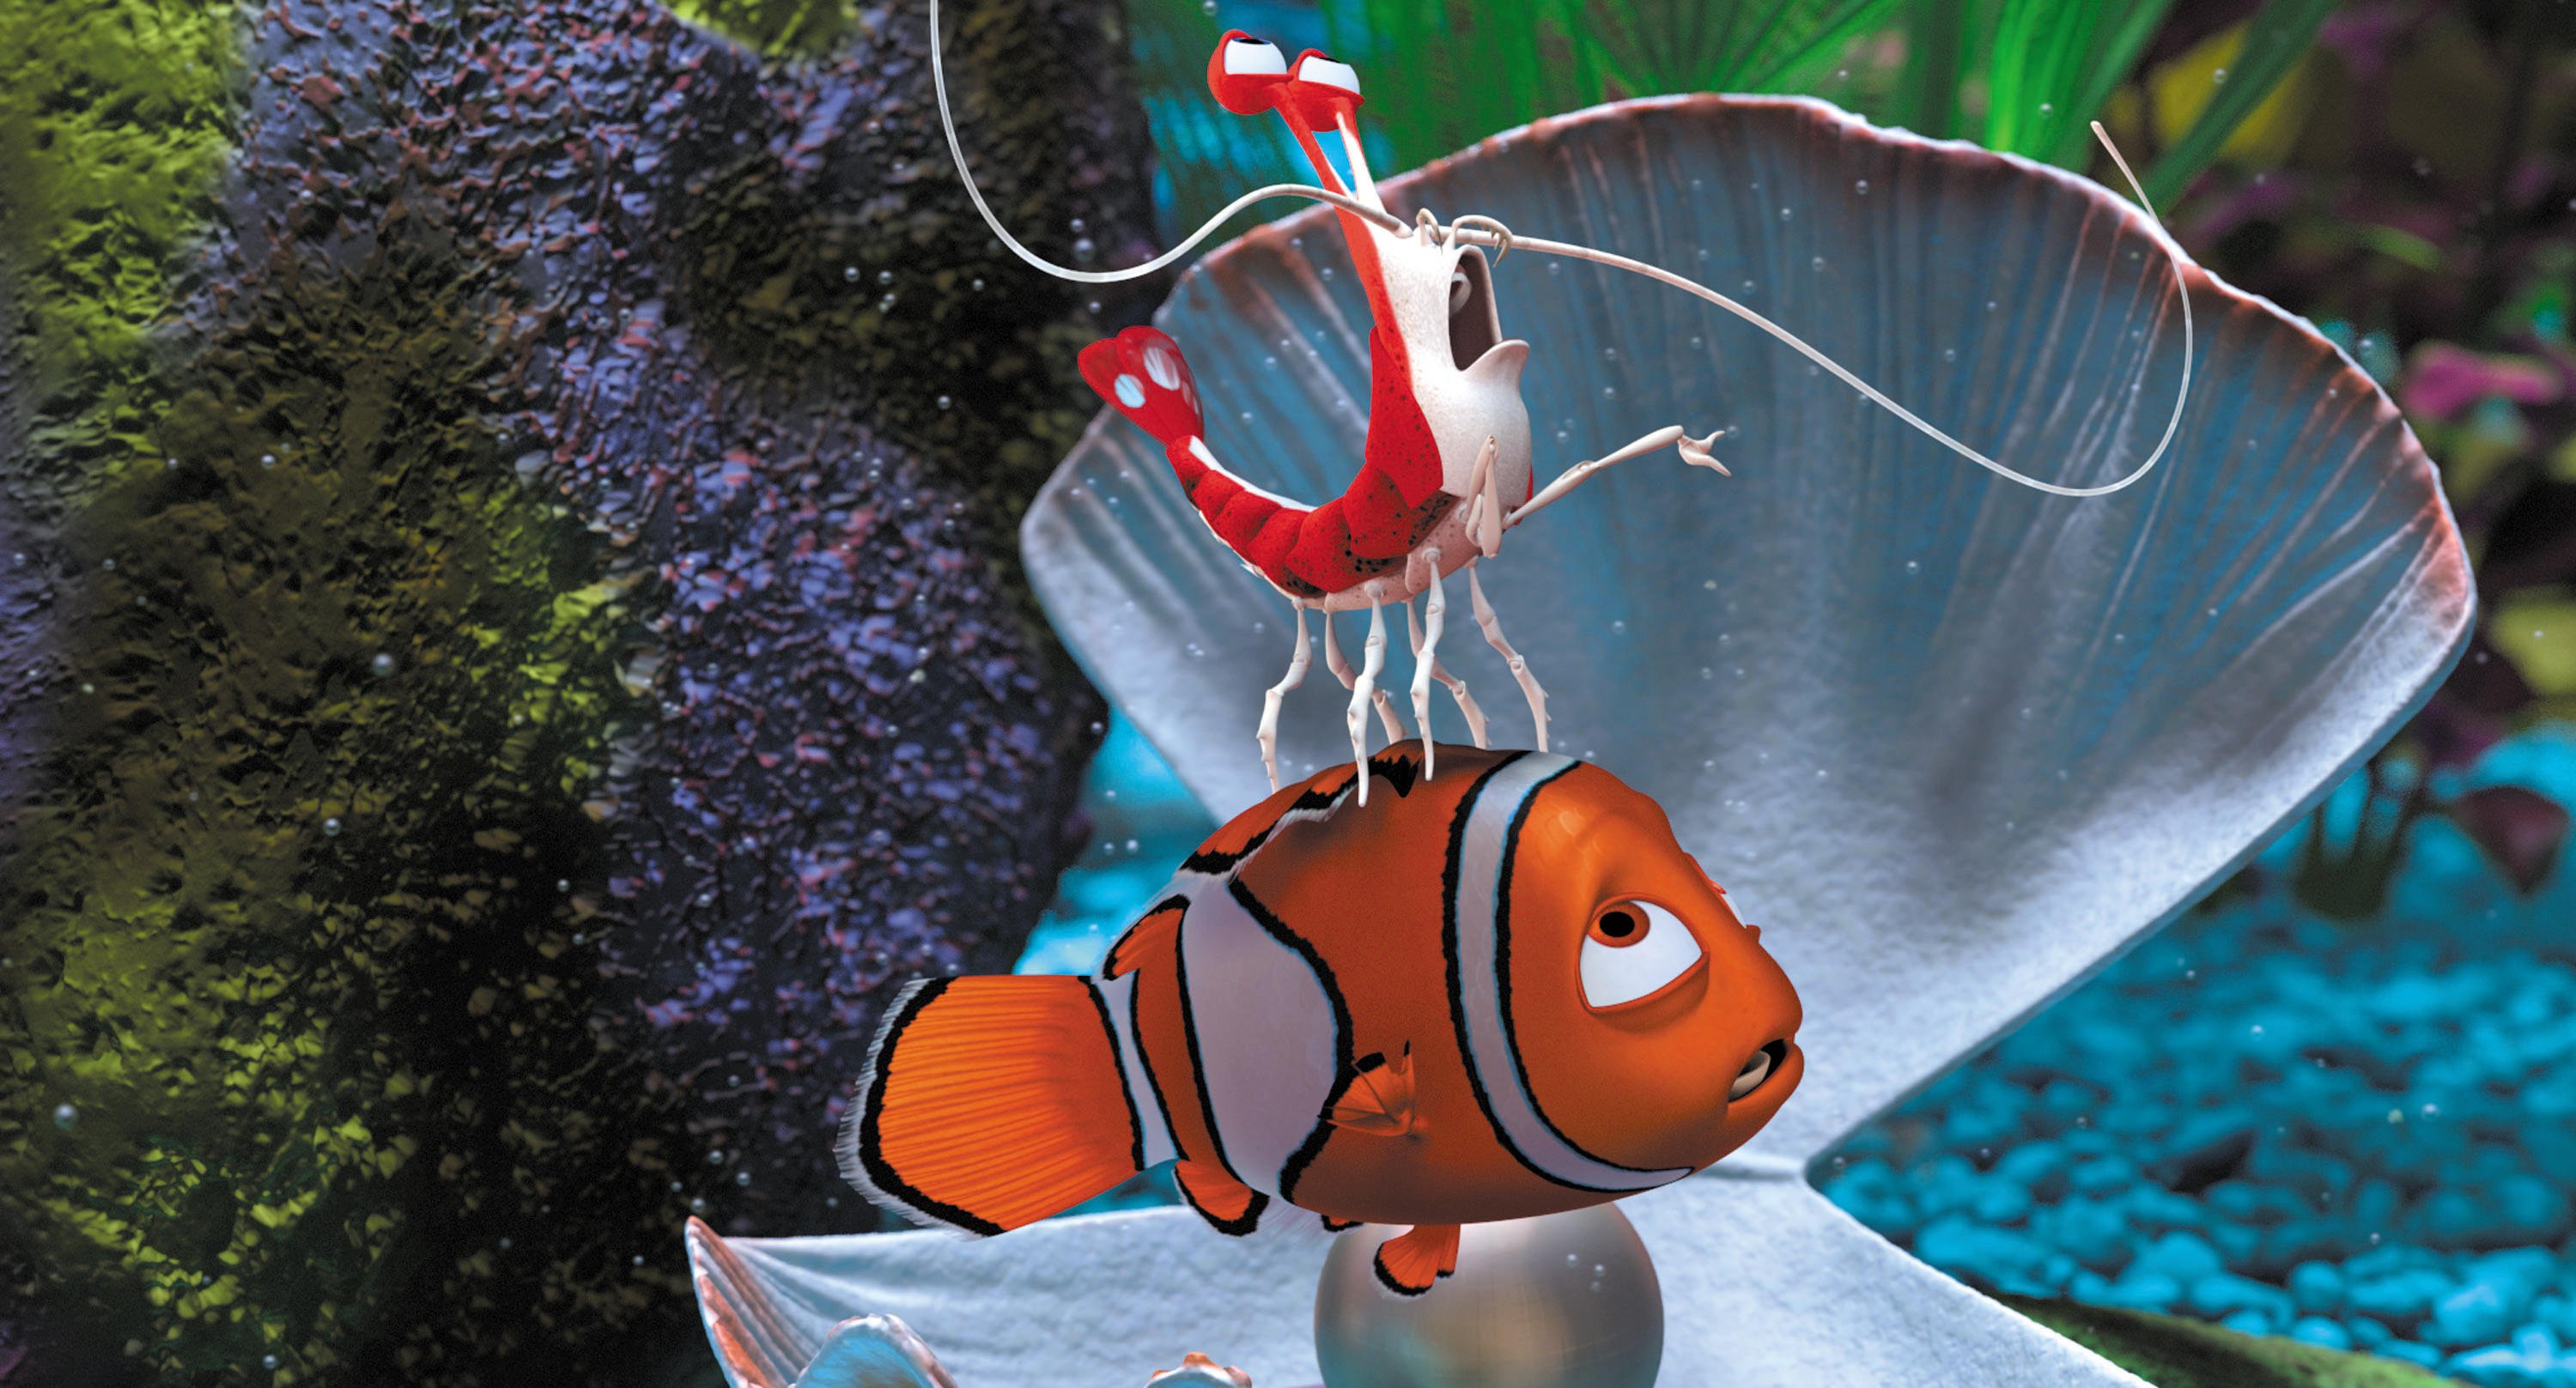 finding nemo full movie download free